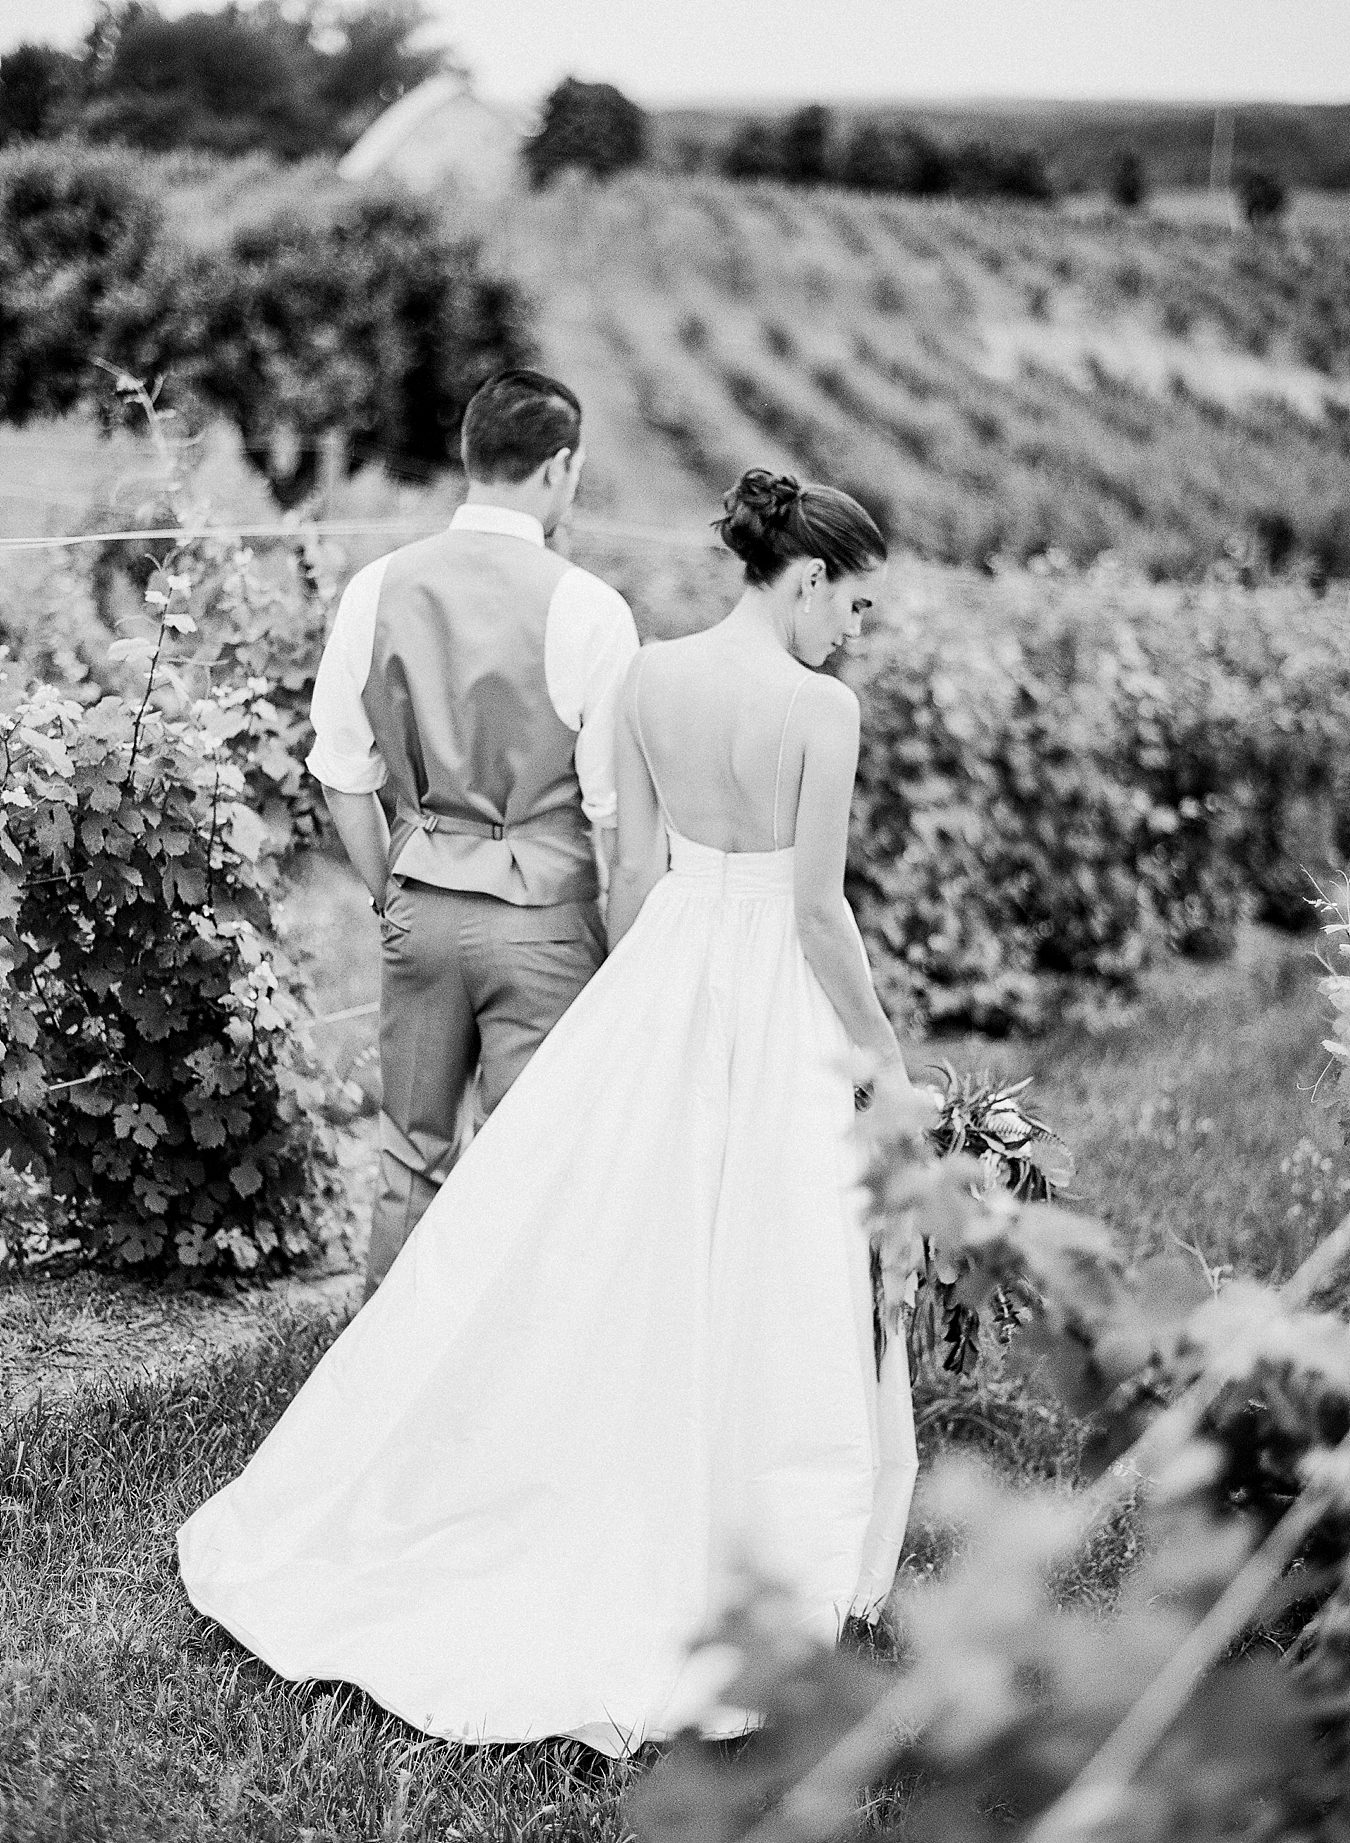 Ciccone Vineyards Wedding | Traverse City Mi Wedding Photography | Cory Weber Photography | Sincerely, Ginger Event Design & Production